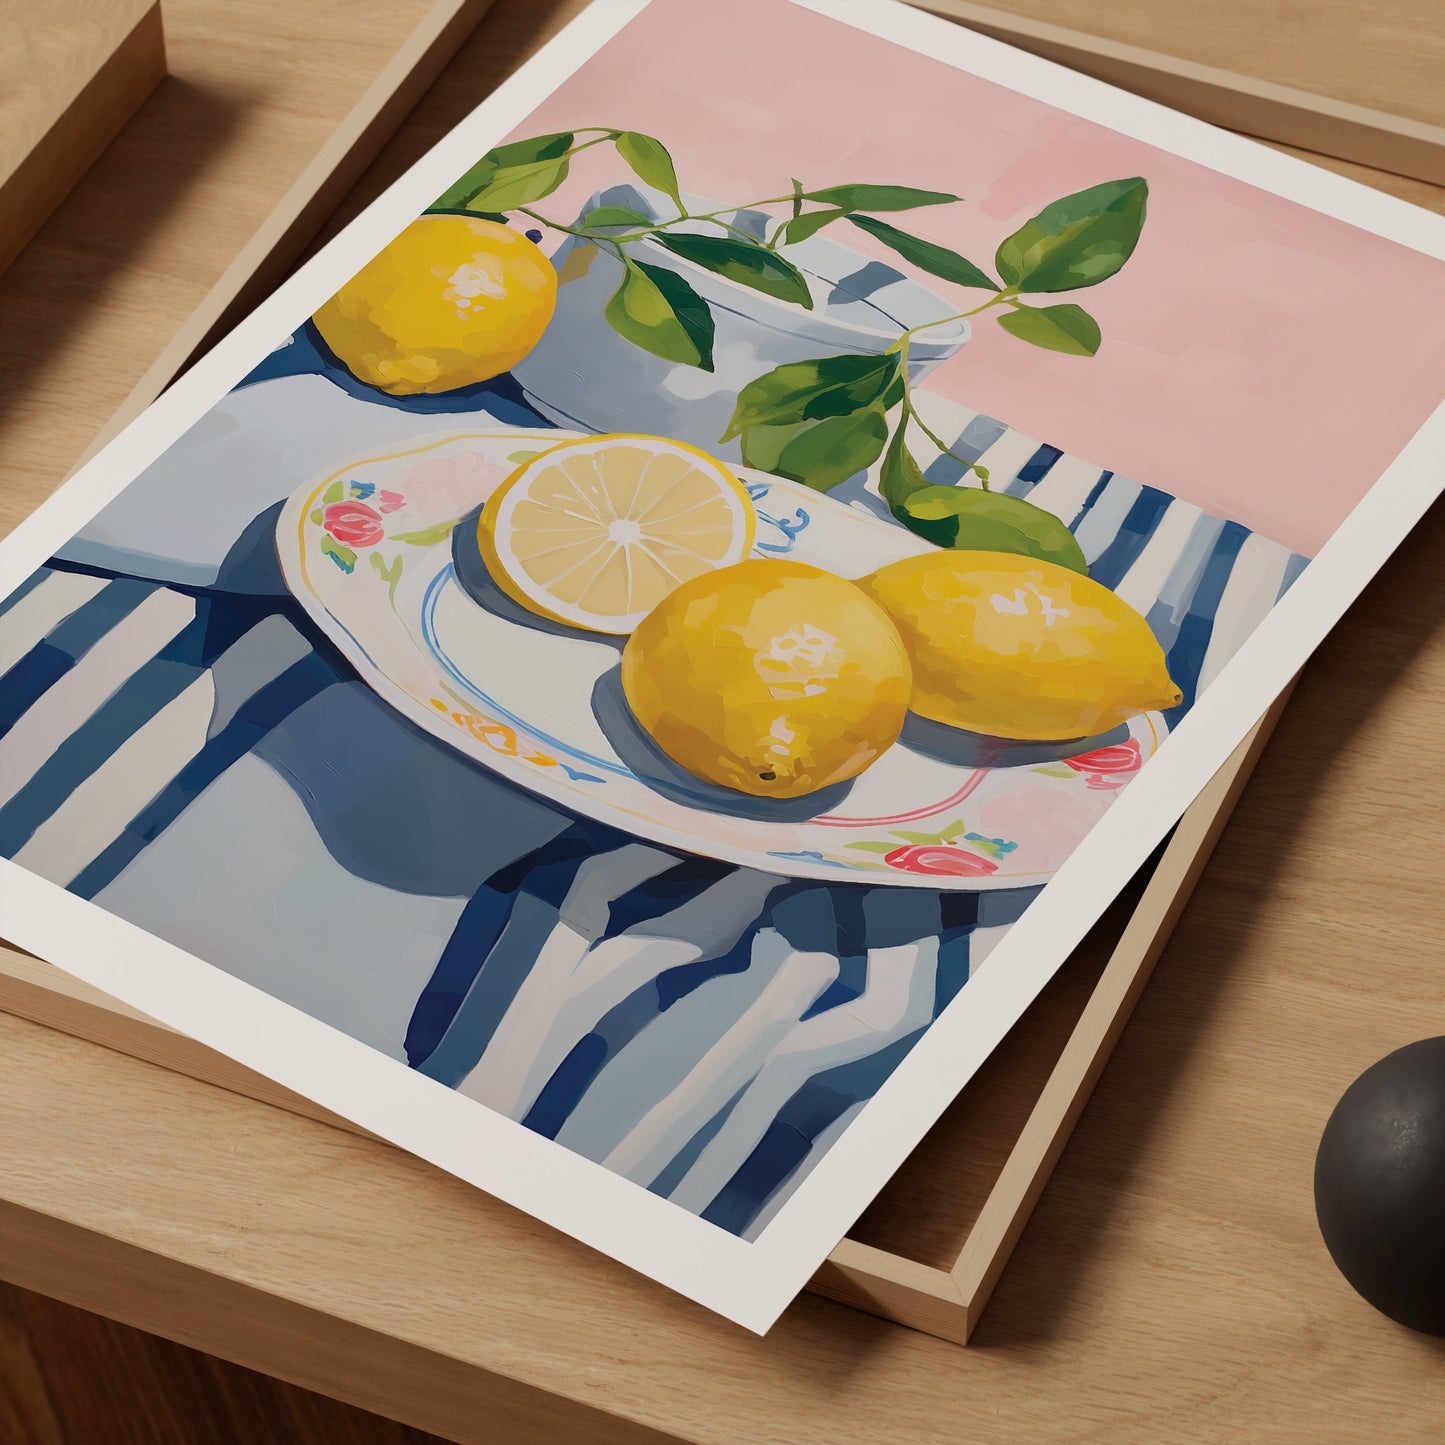 a painting of lemons on a plate on a table